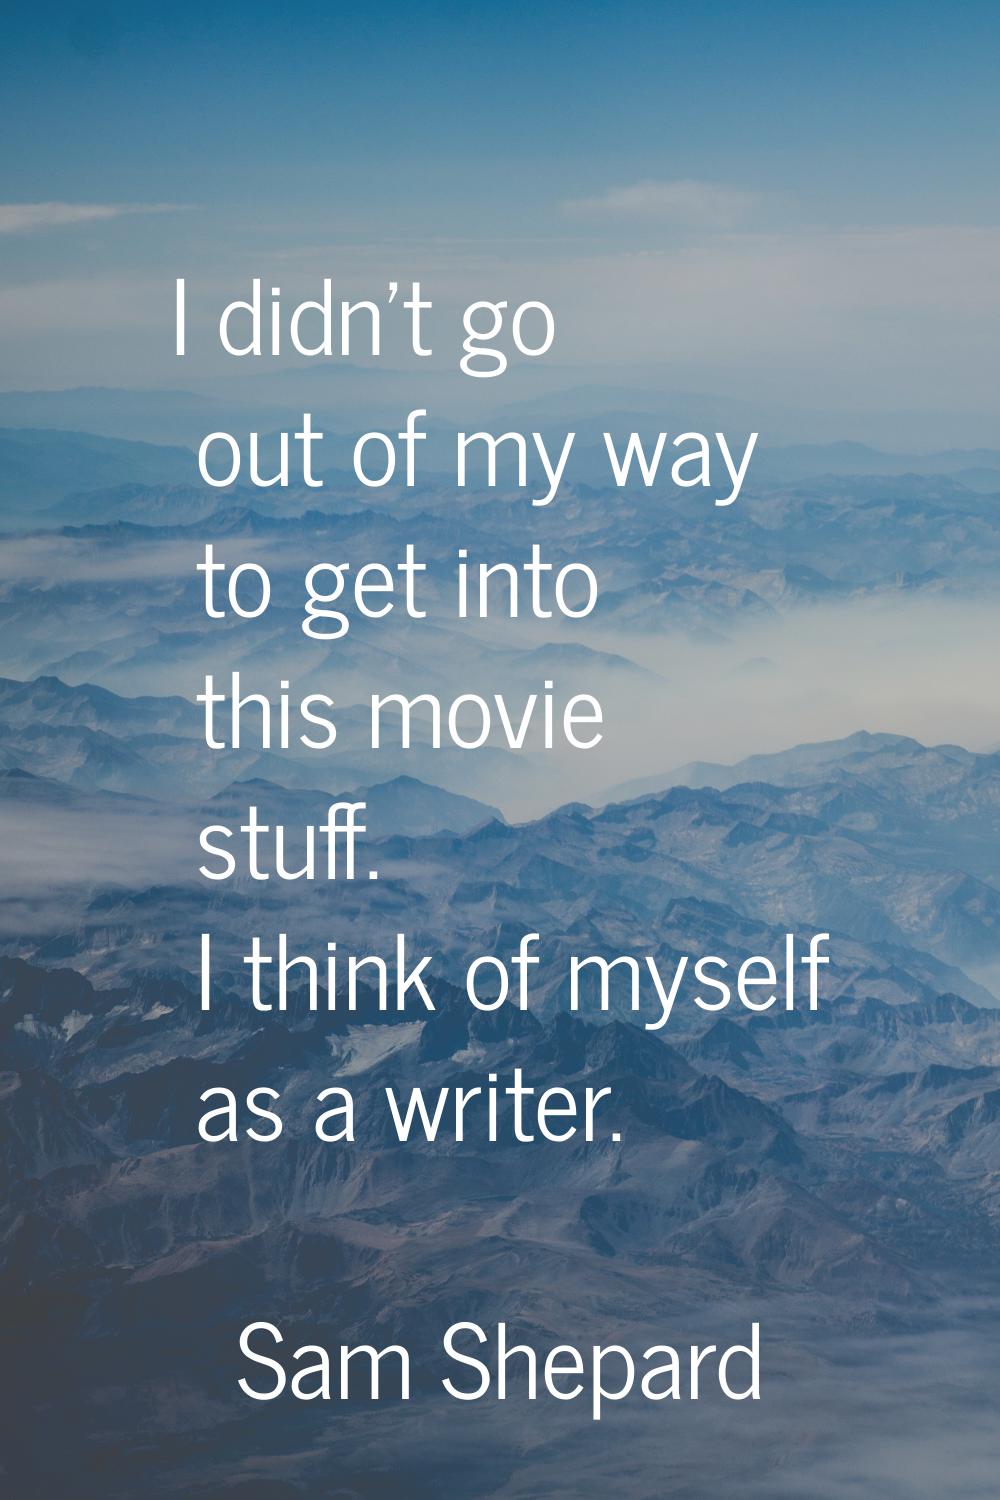 I didn't go out of my way to get into this movie stuff. I think of myself as a writer.